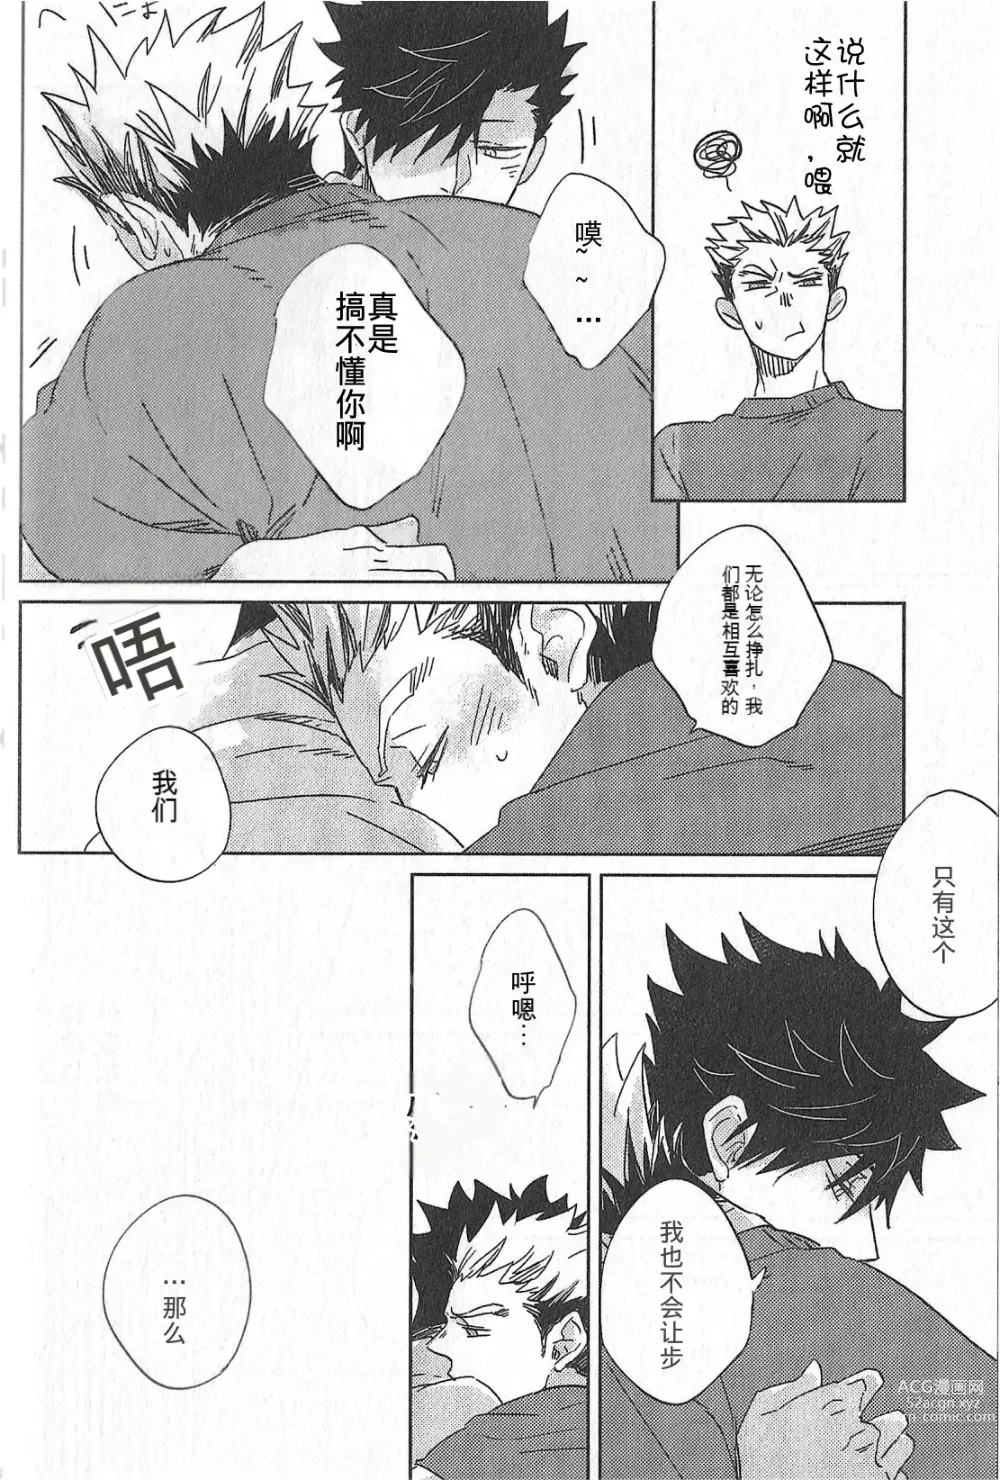 Page 11 of doujinshi 极境的野兽 前篇